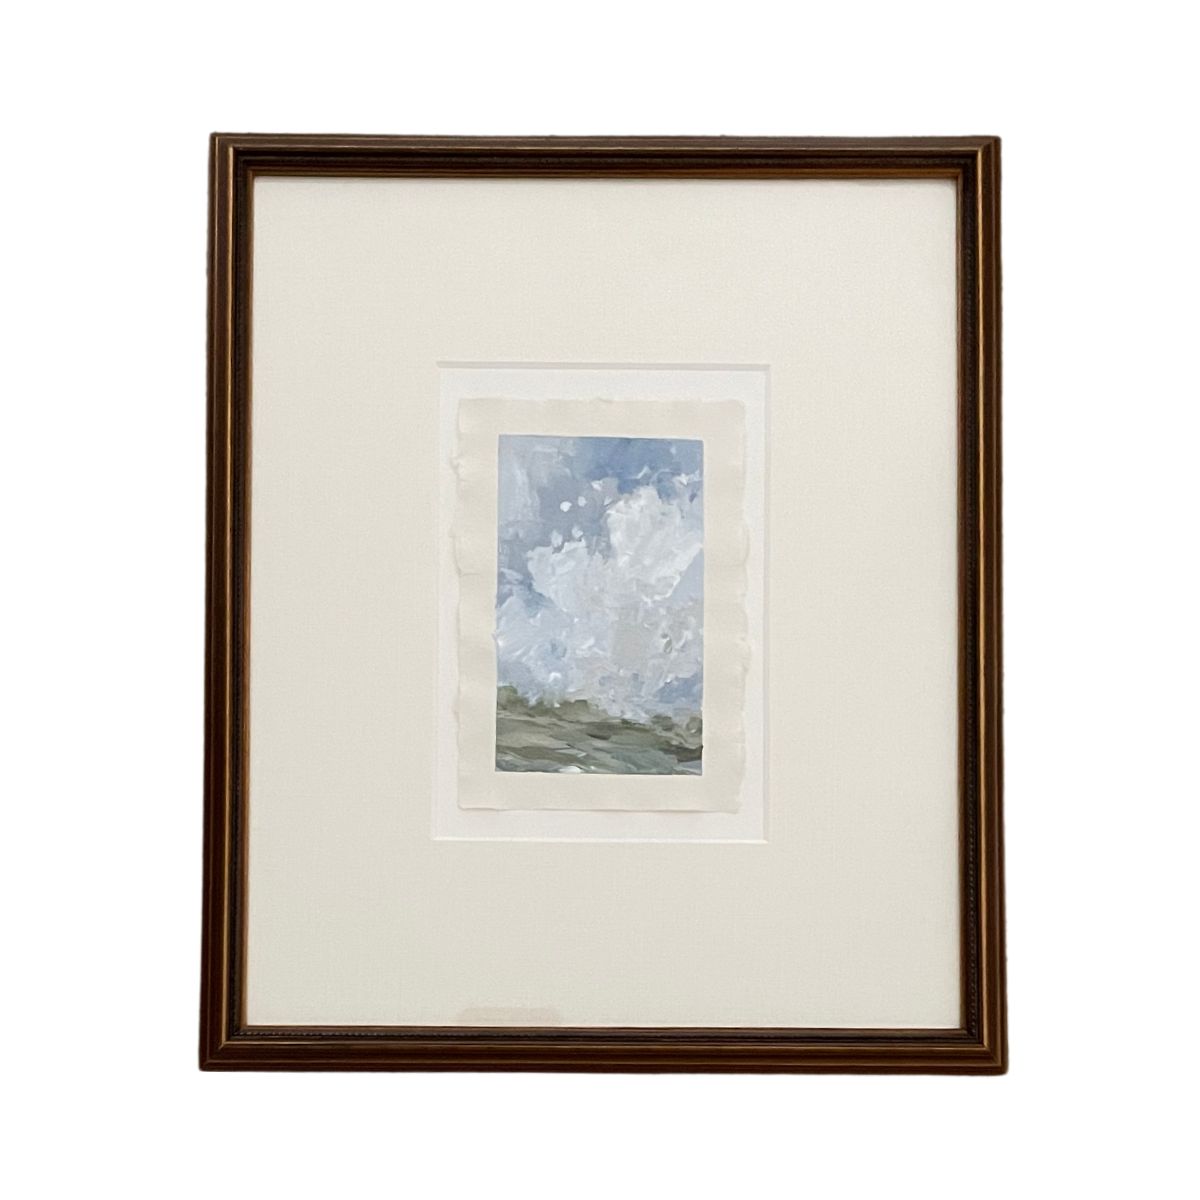 Framed Landscape by Laura McCarty #4